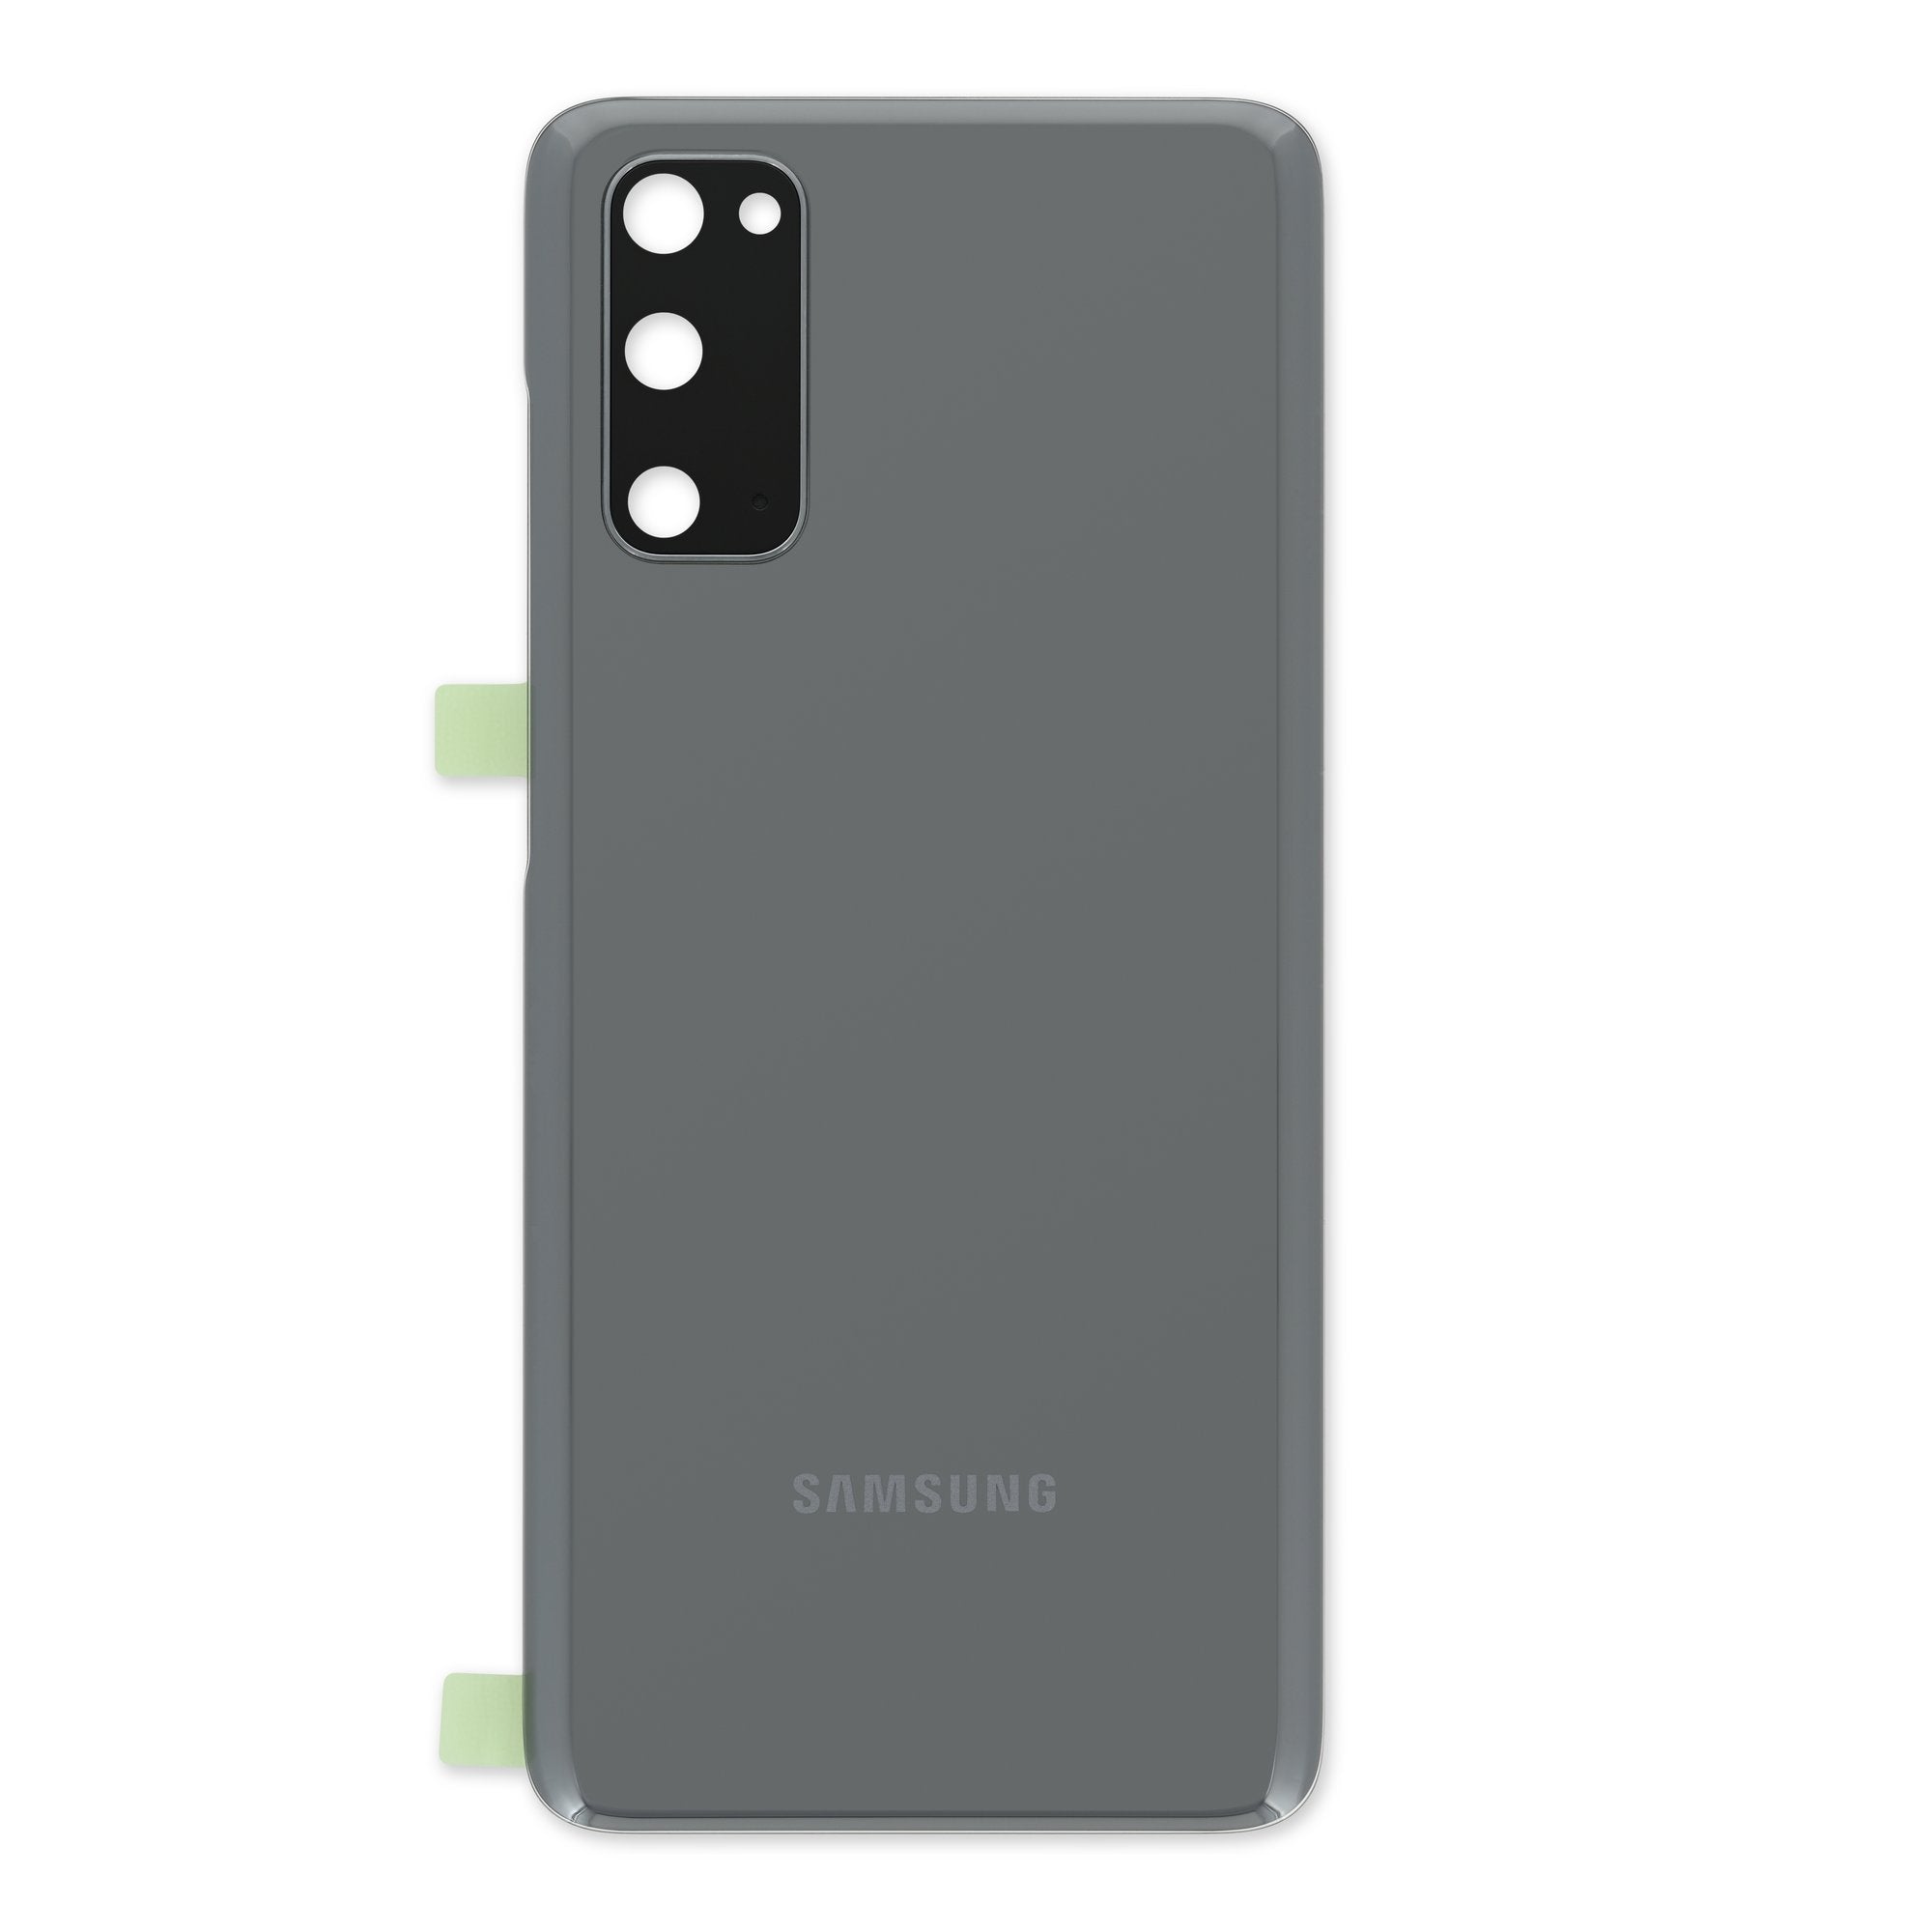 Samsung Galaxy S20 5G (USA) Back Glass - Genuine Gray New Part Only